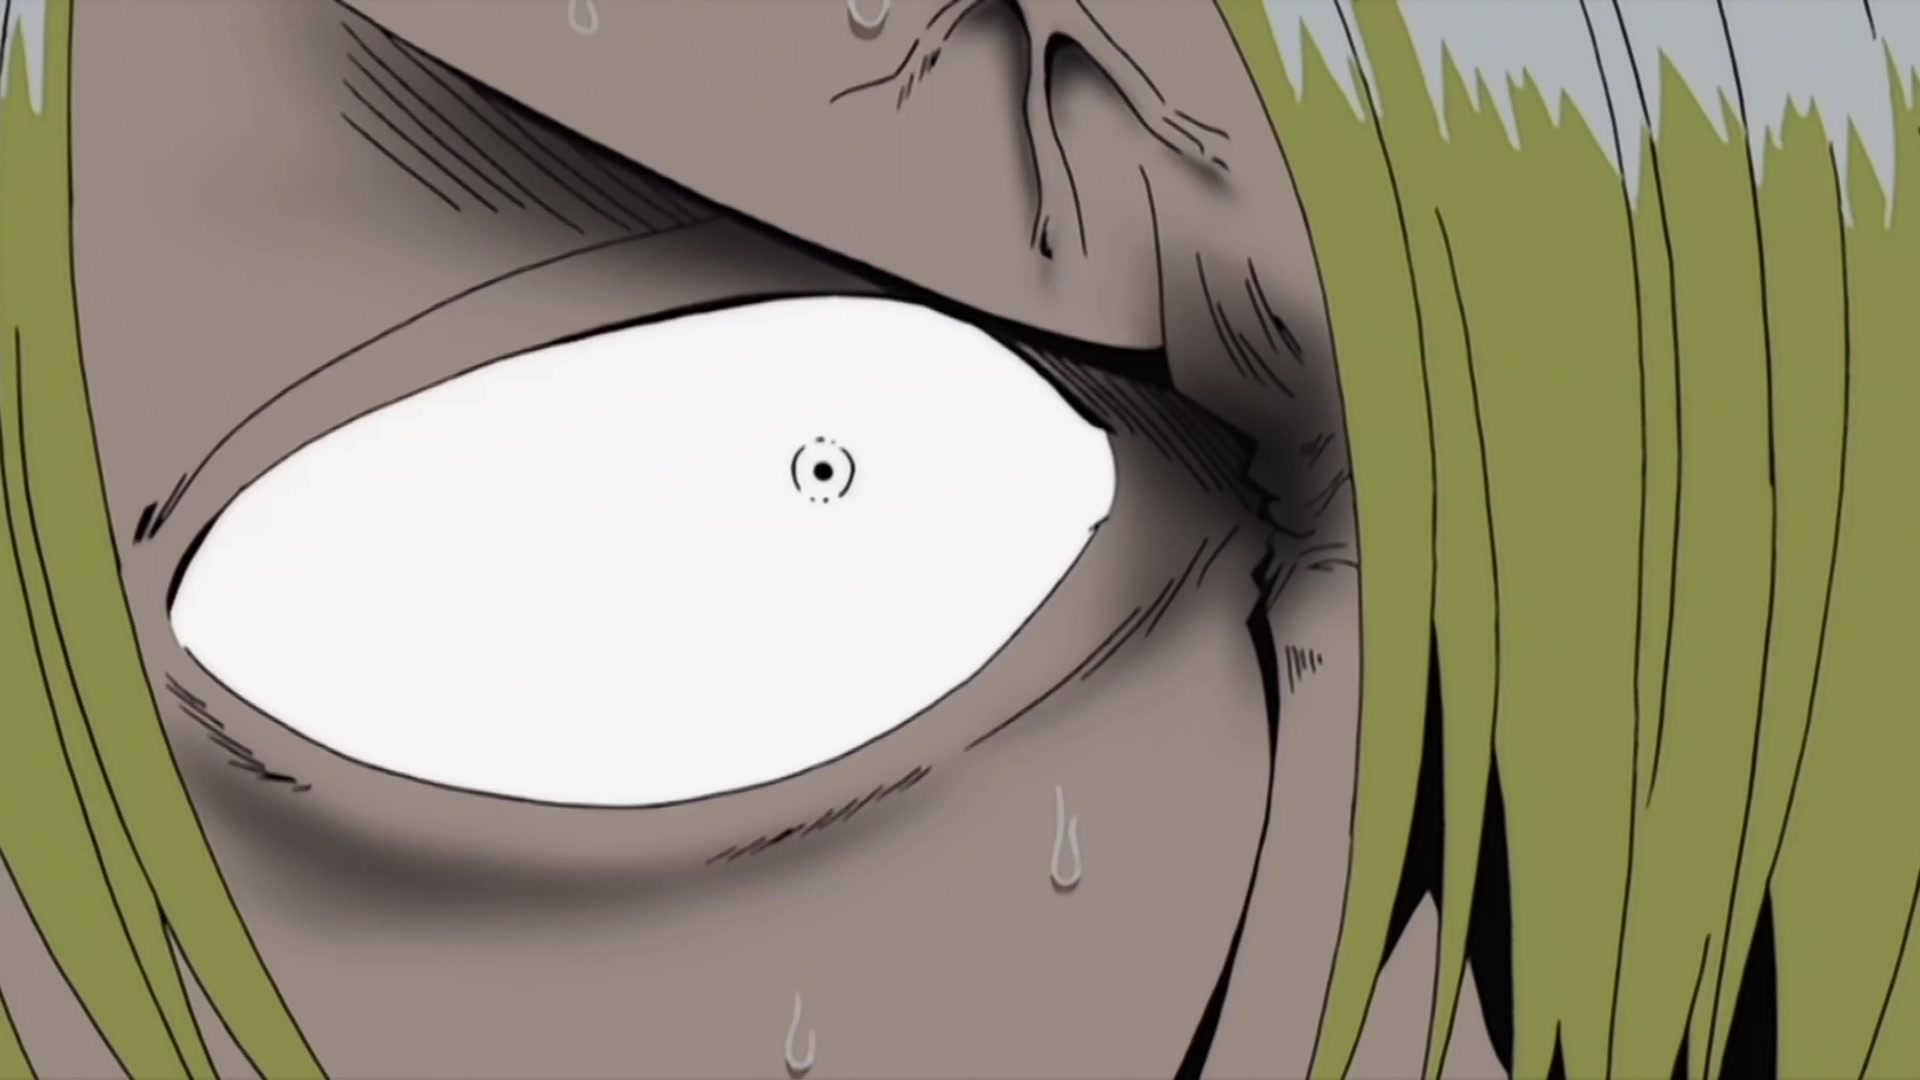 ep 78 one piece vf torrent